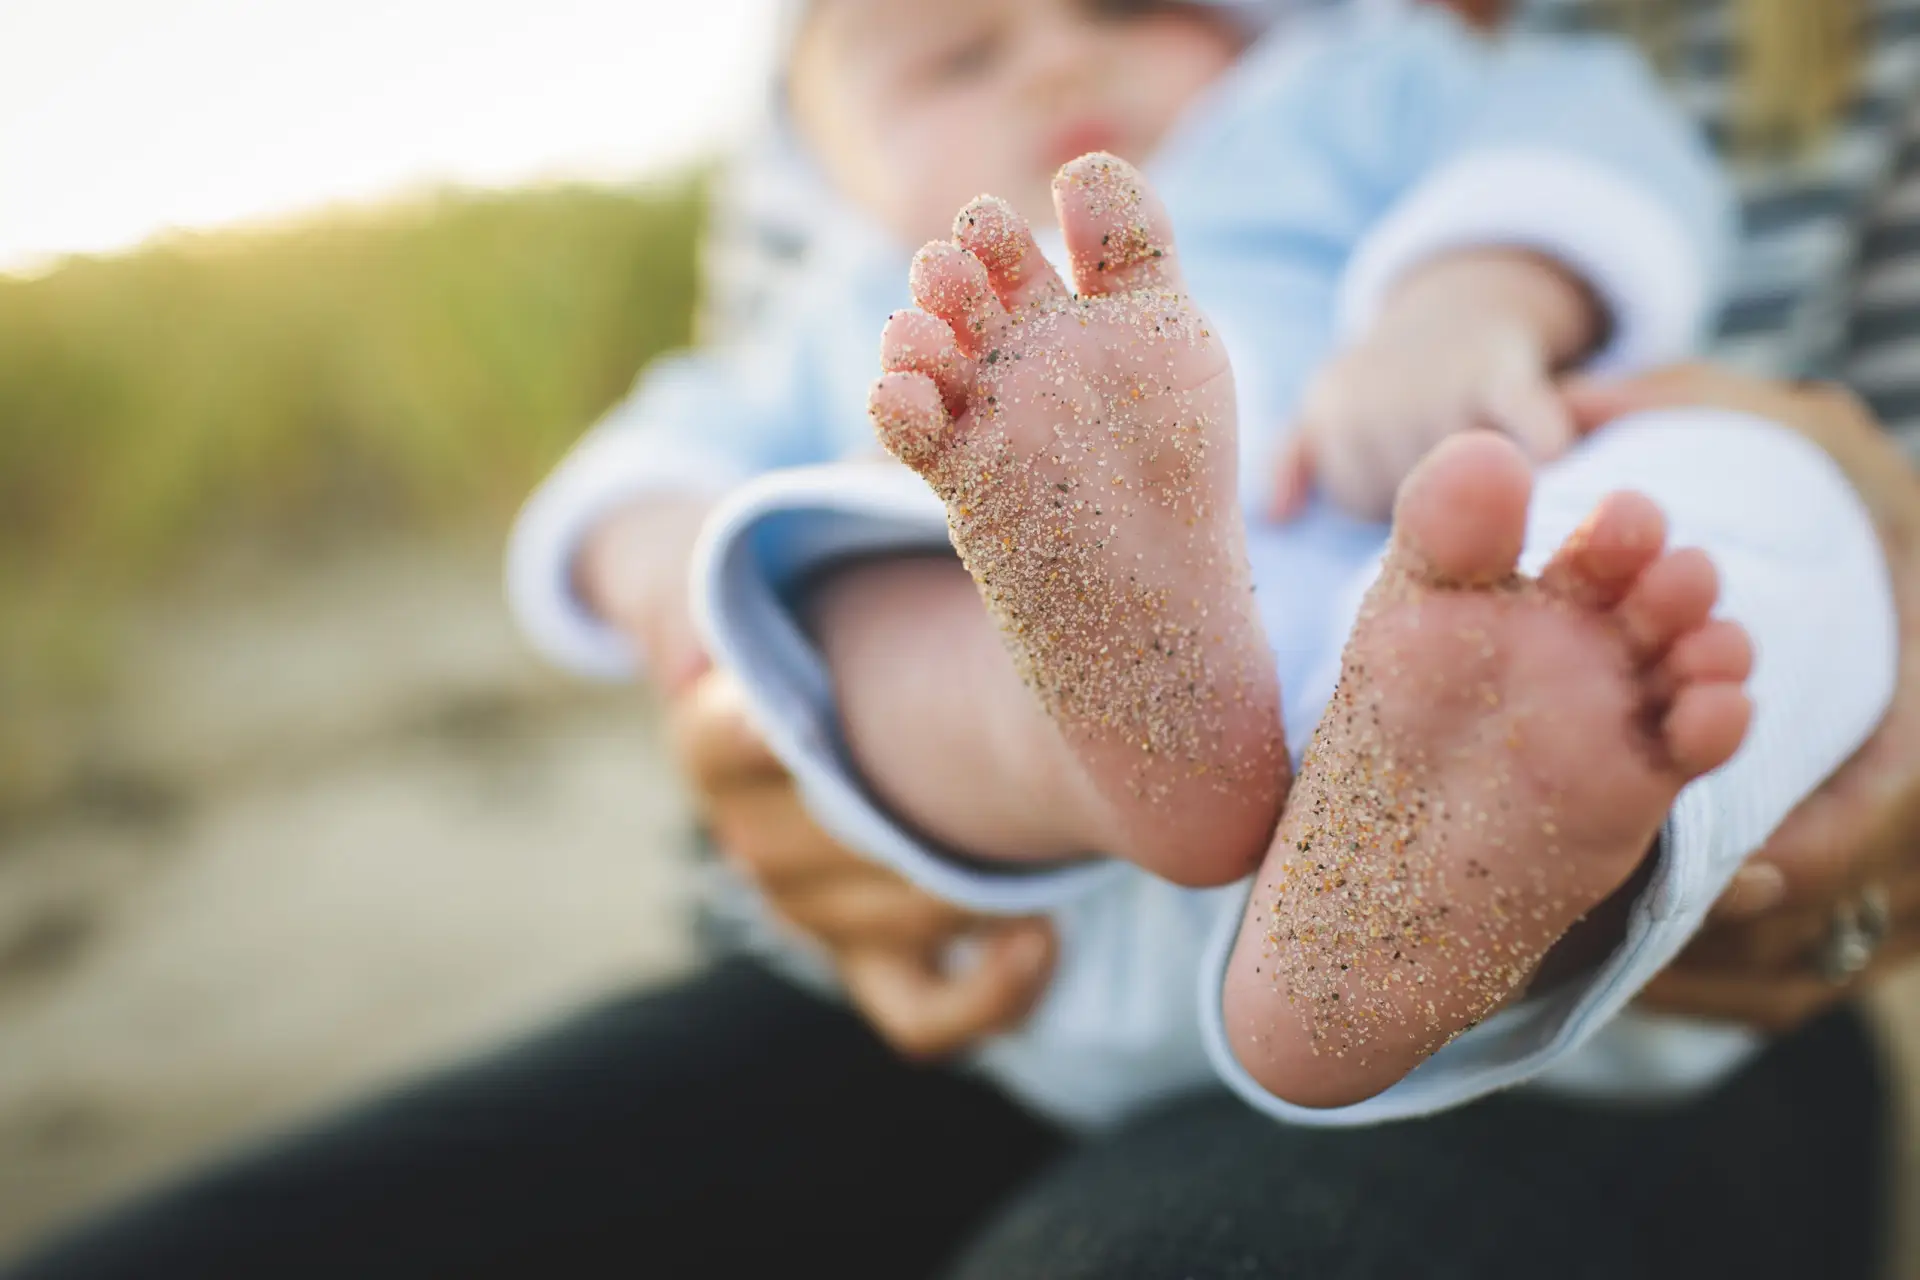 A child being held with sand on its feet